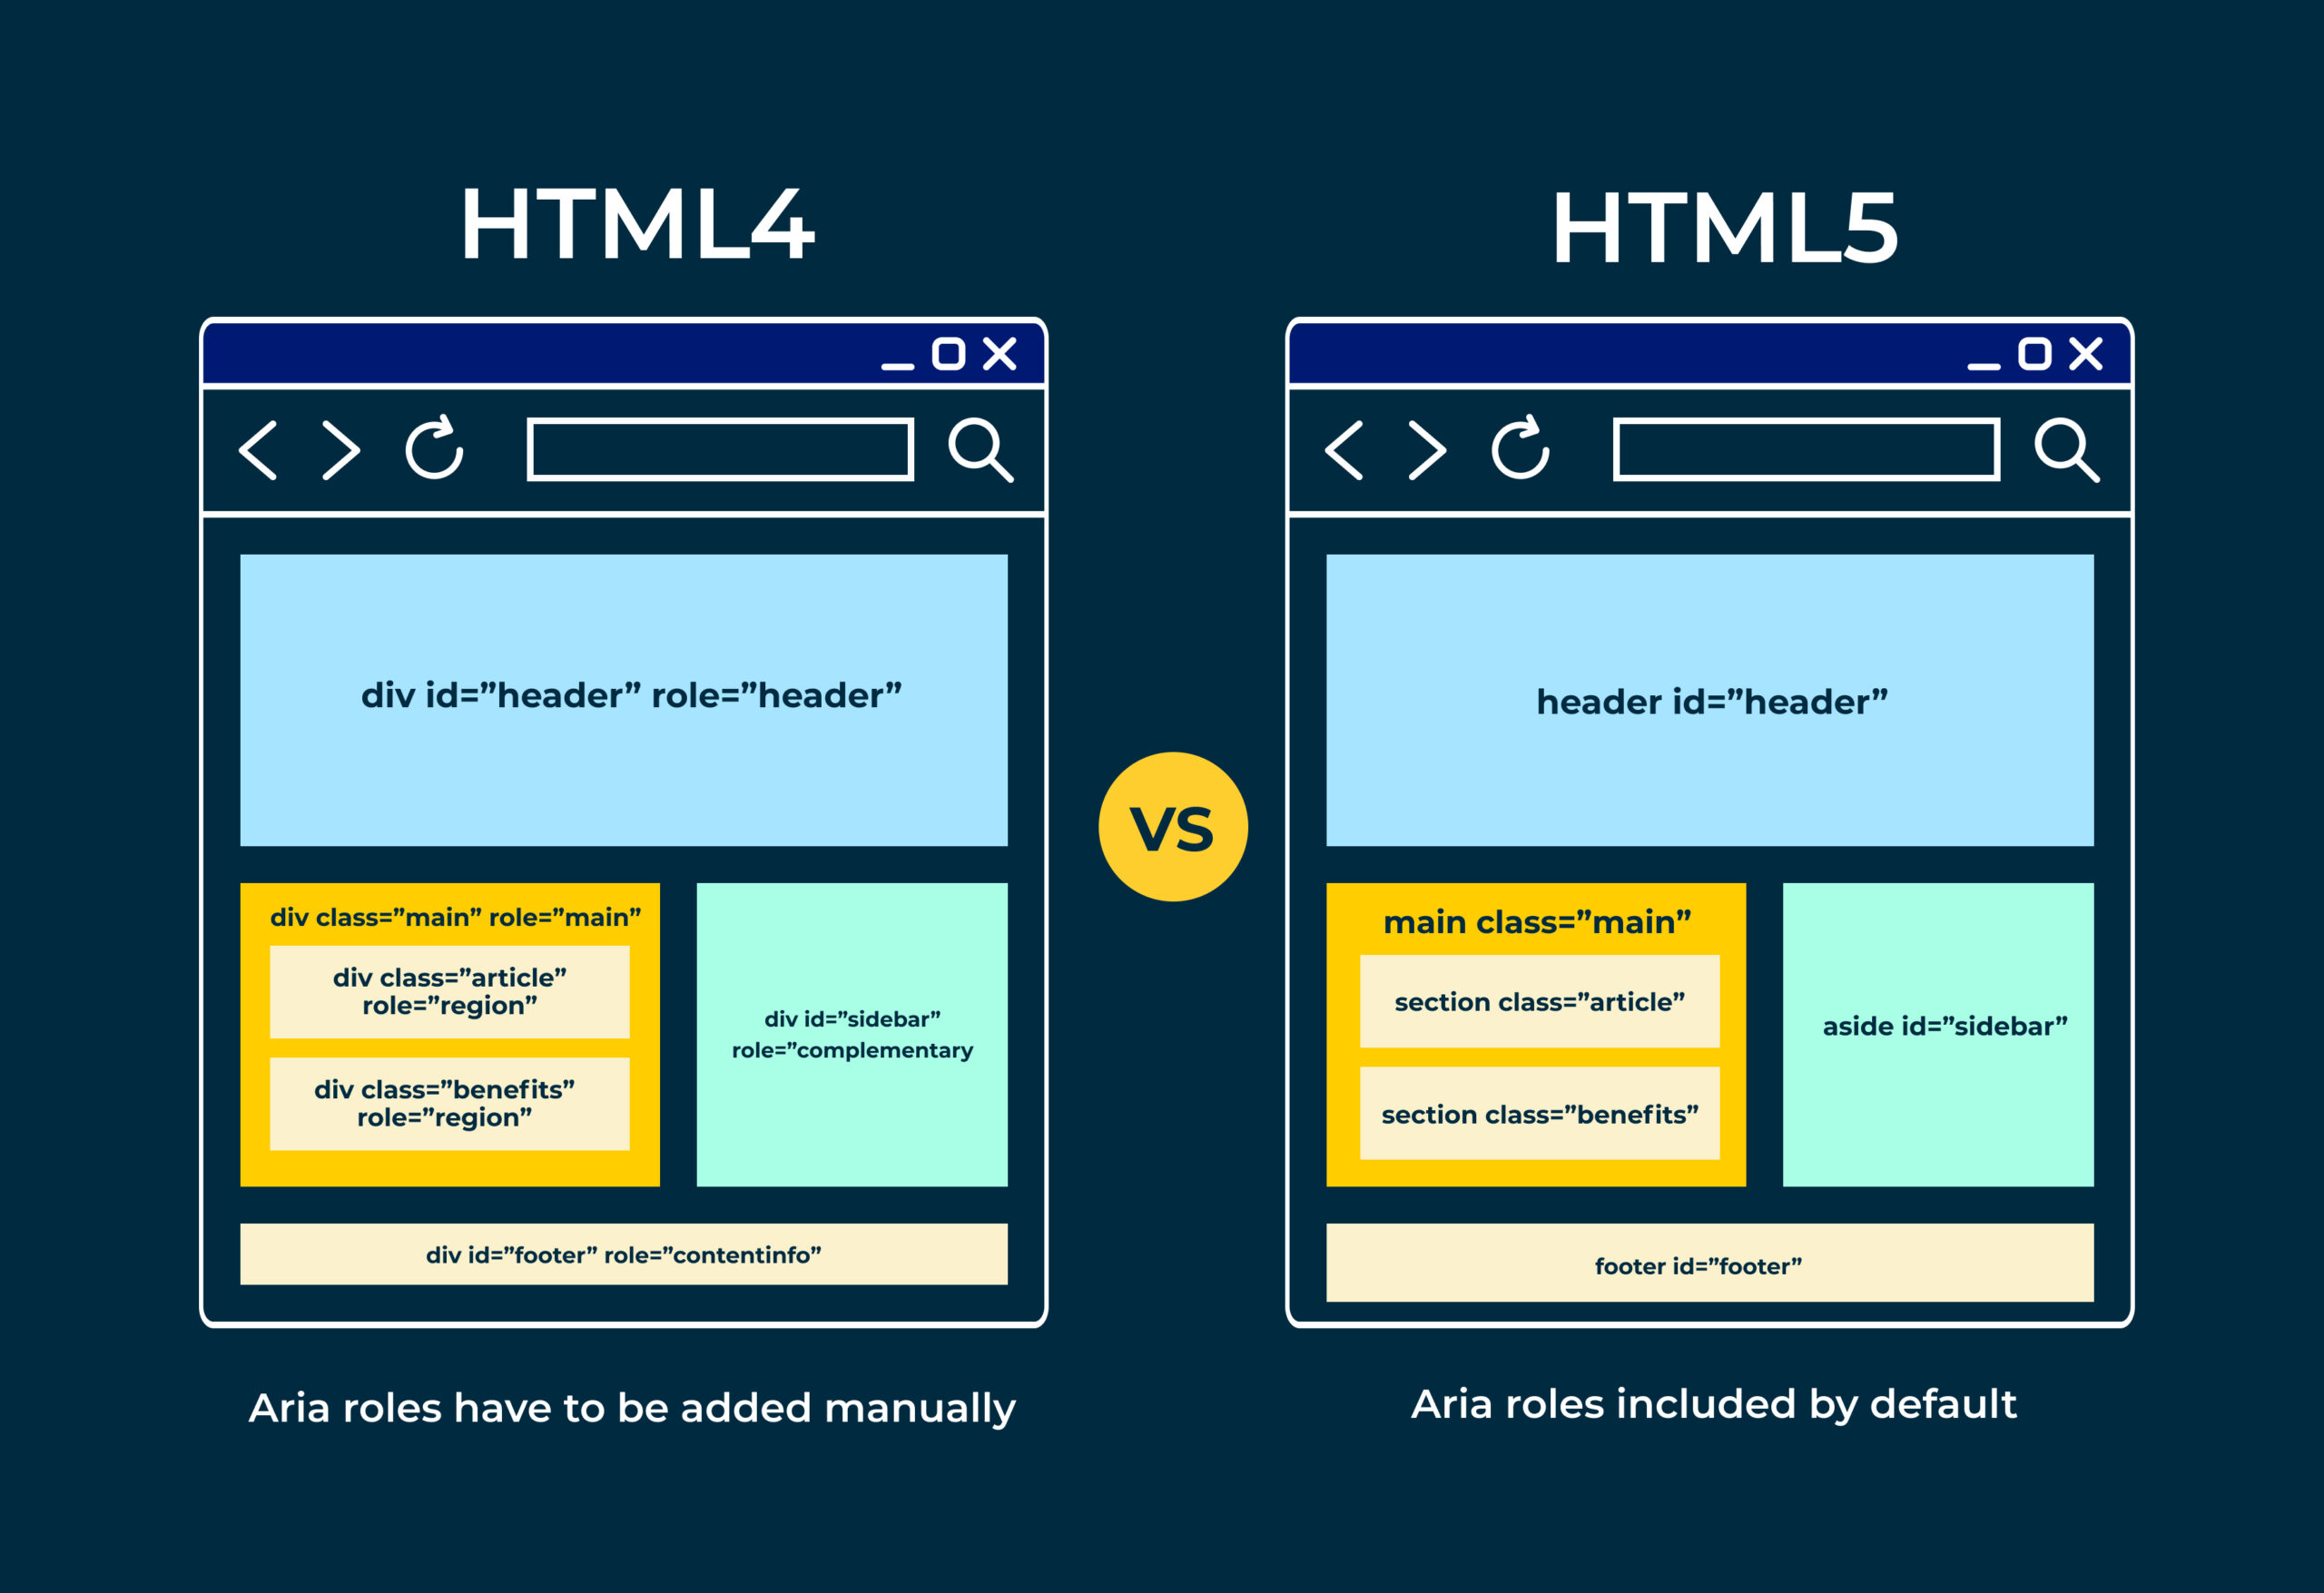 Comparison of two HTML documents. The first one has div elements and aria roles have to be added manually and the second one has HTML5 elements, header, main,section,footer, aside. The second example uses less code and doesn't need aria roles, making html5 more robust and efficient.